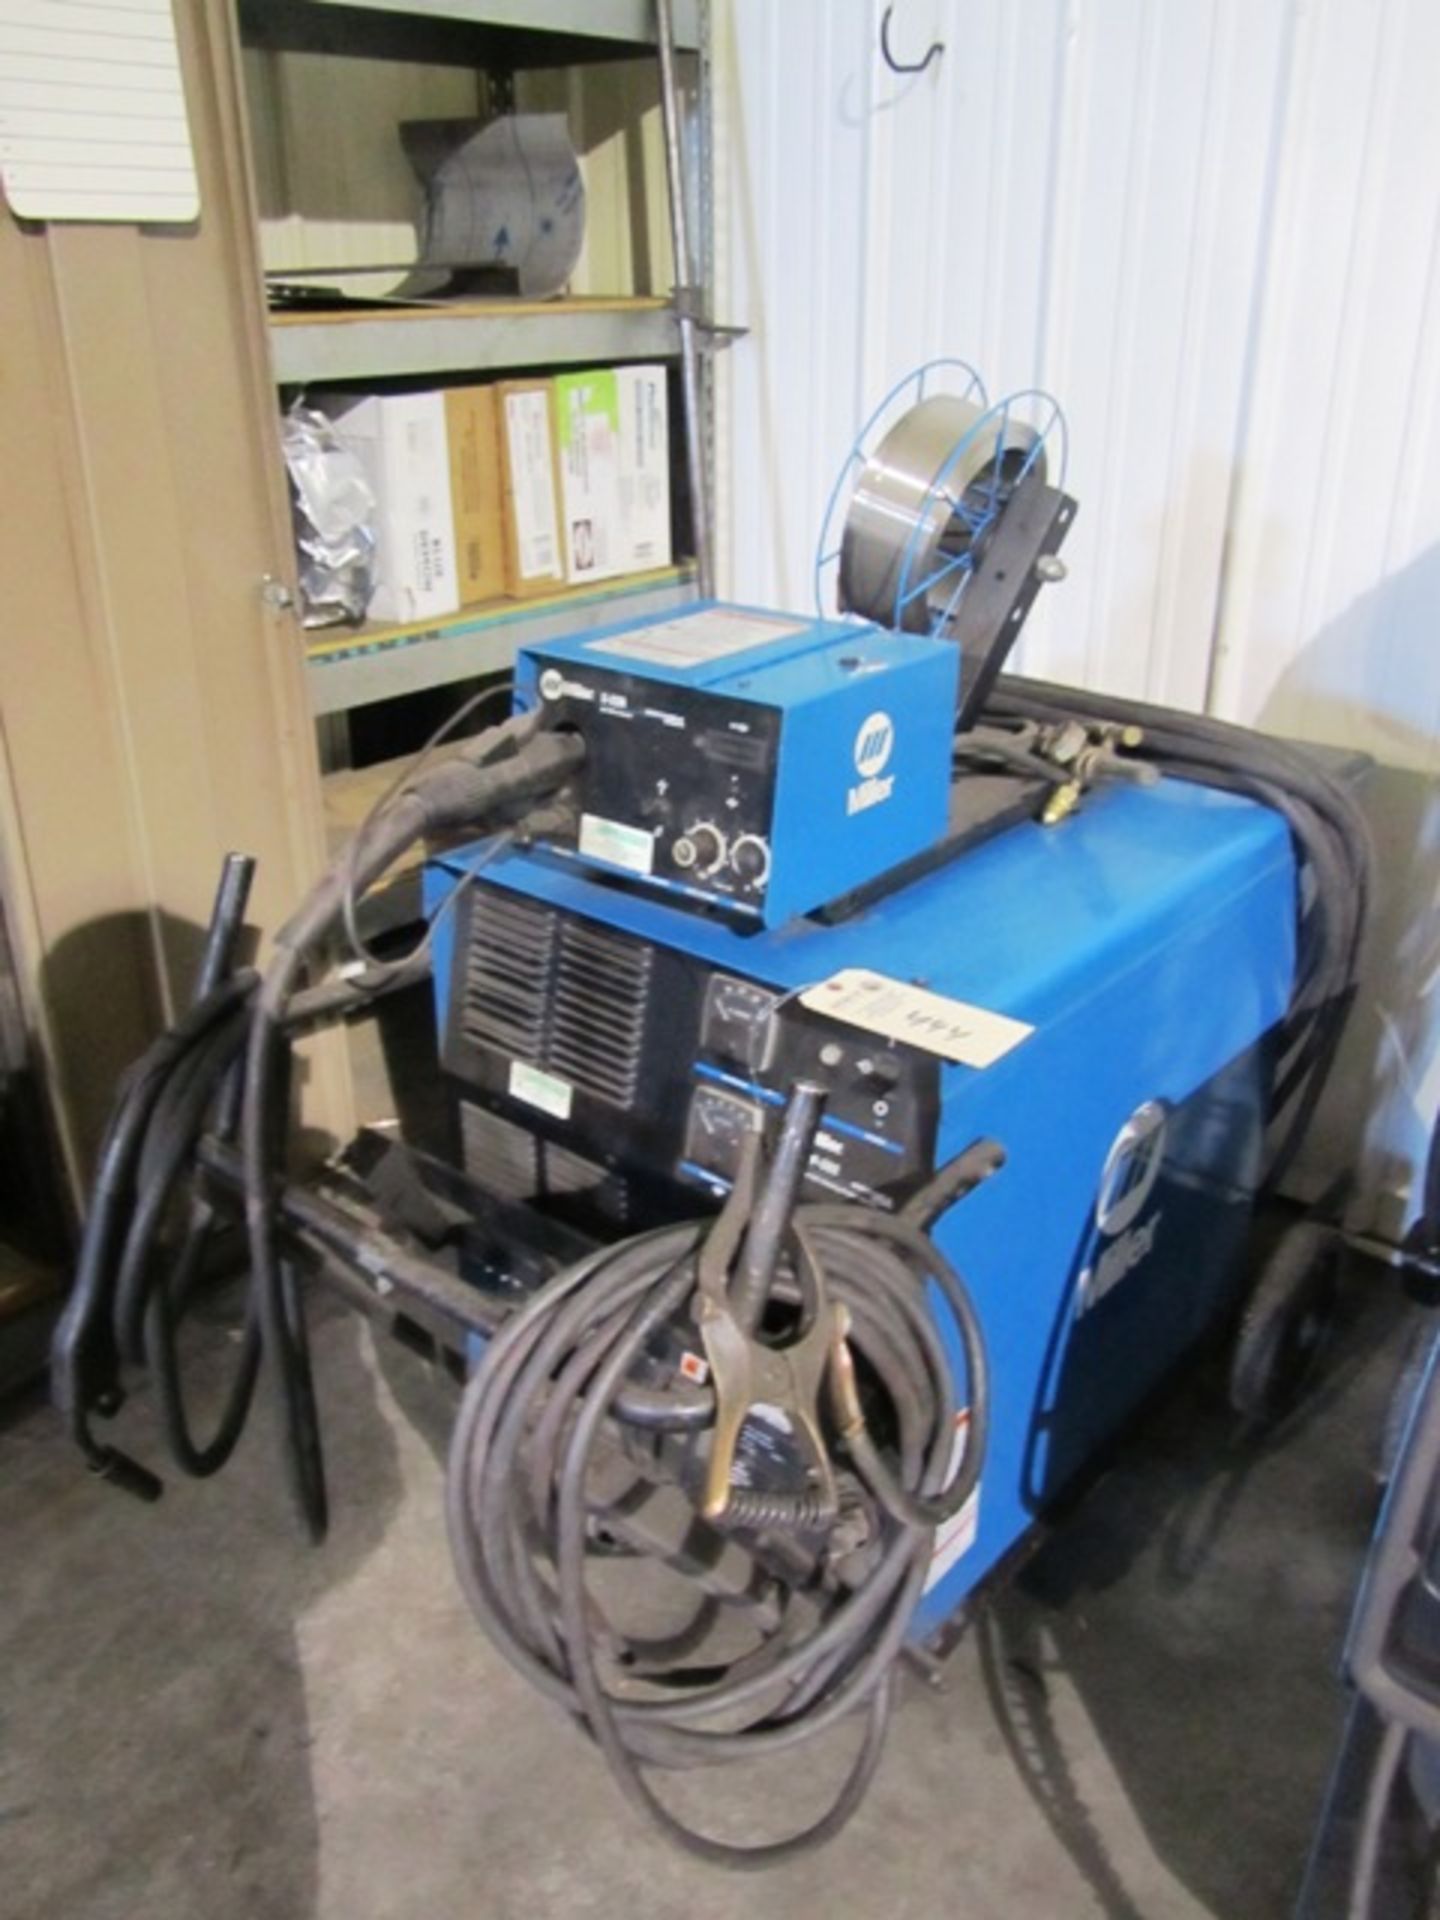 Miller CP302 CV-DC 300 Amp Portable Mig Welder with Miller S-22A 24V Wire Feed, sn:KH397552